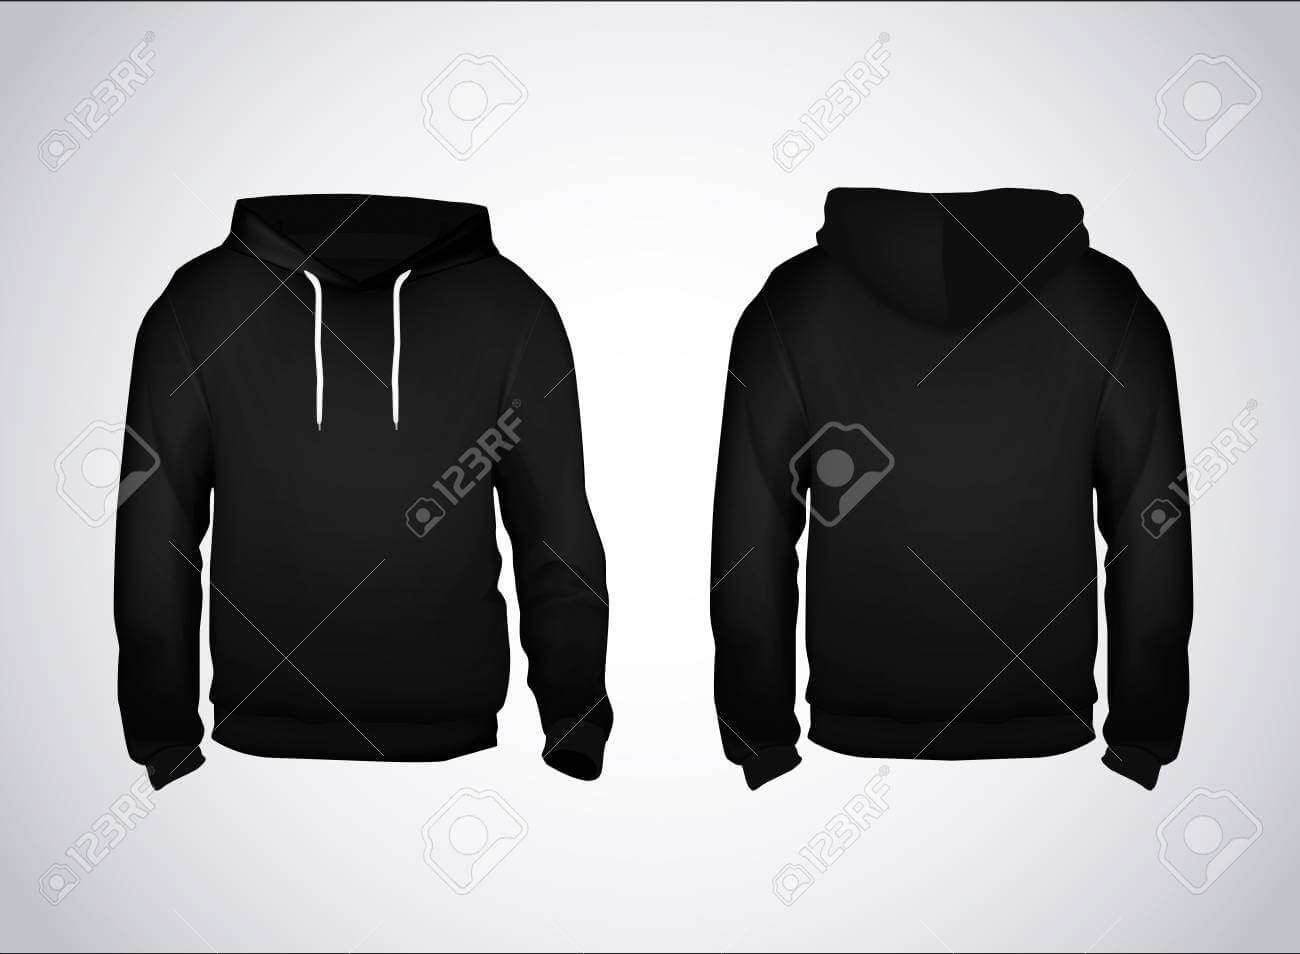 Black Men's Sweatshirt Template With Sample Text Front And Back.. Pertaining To Blank Black Hoodie Template